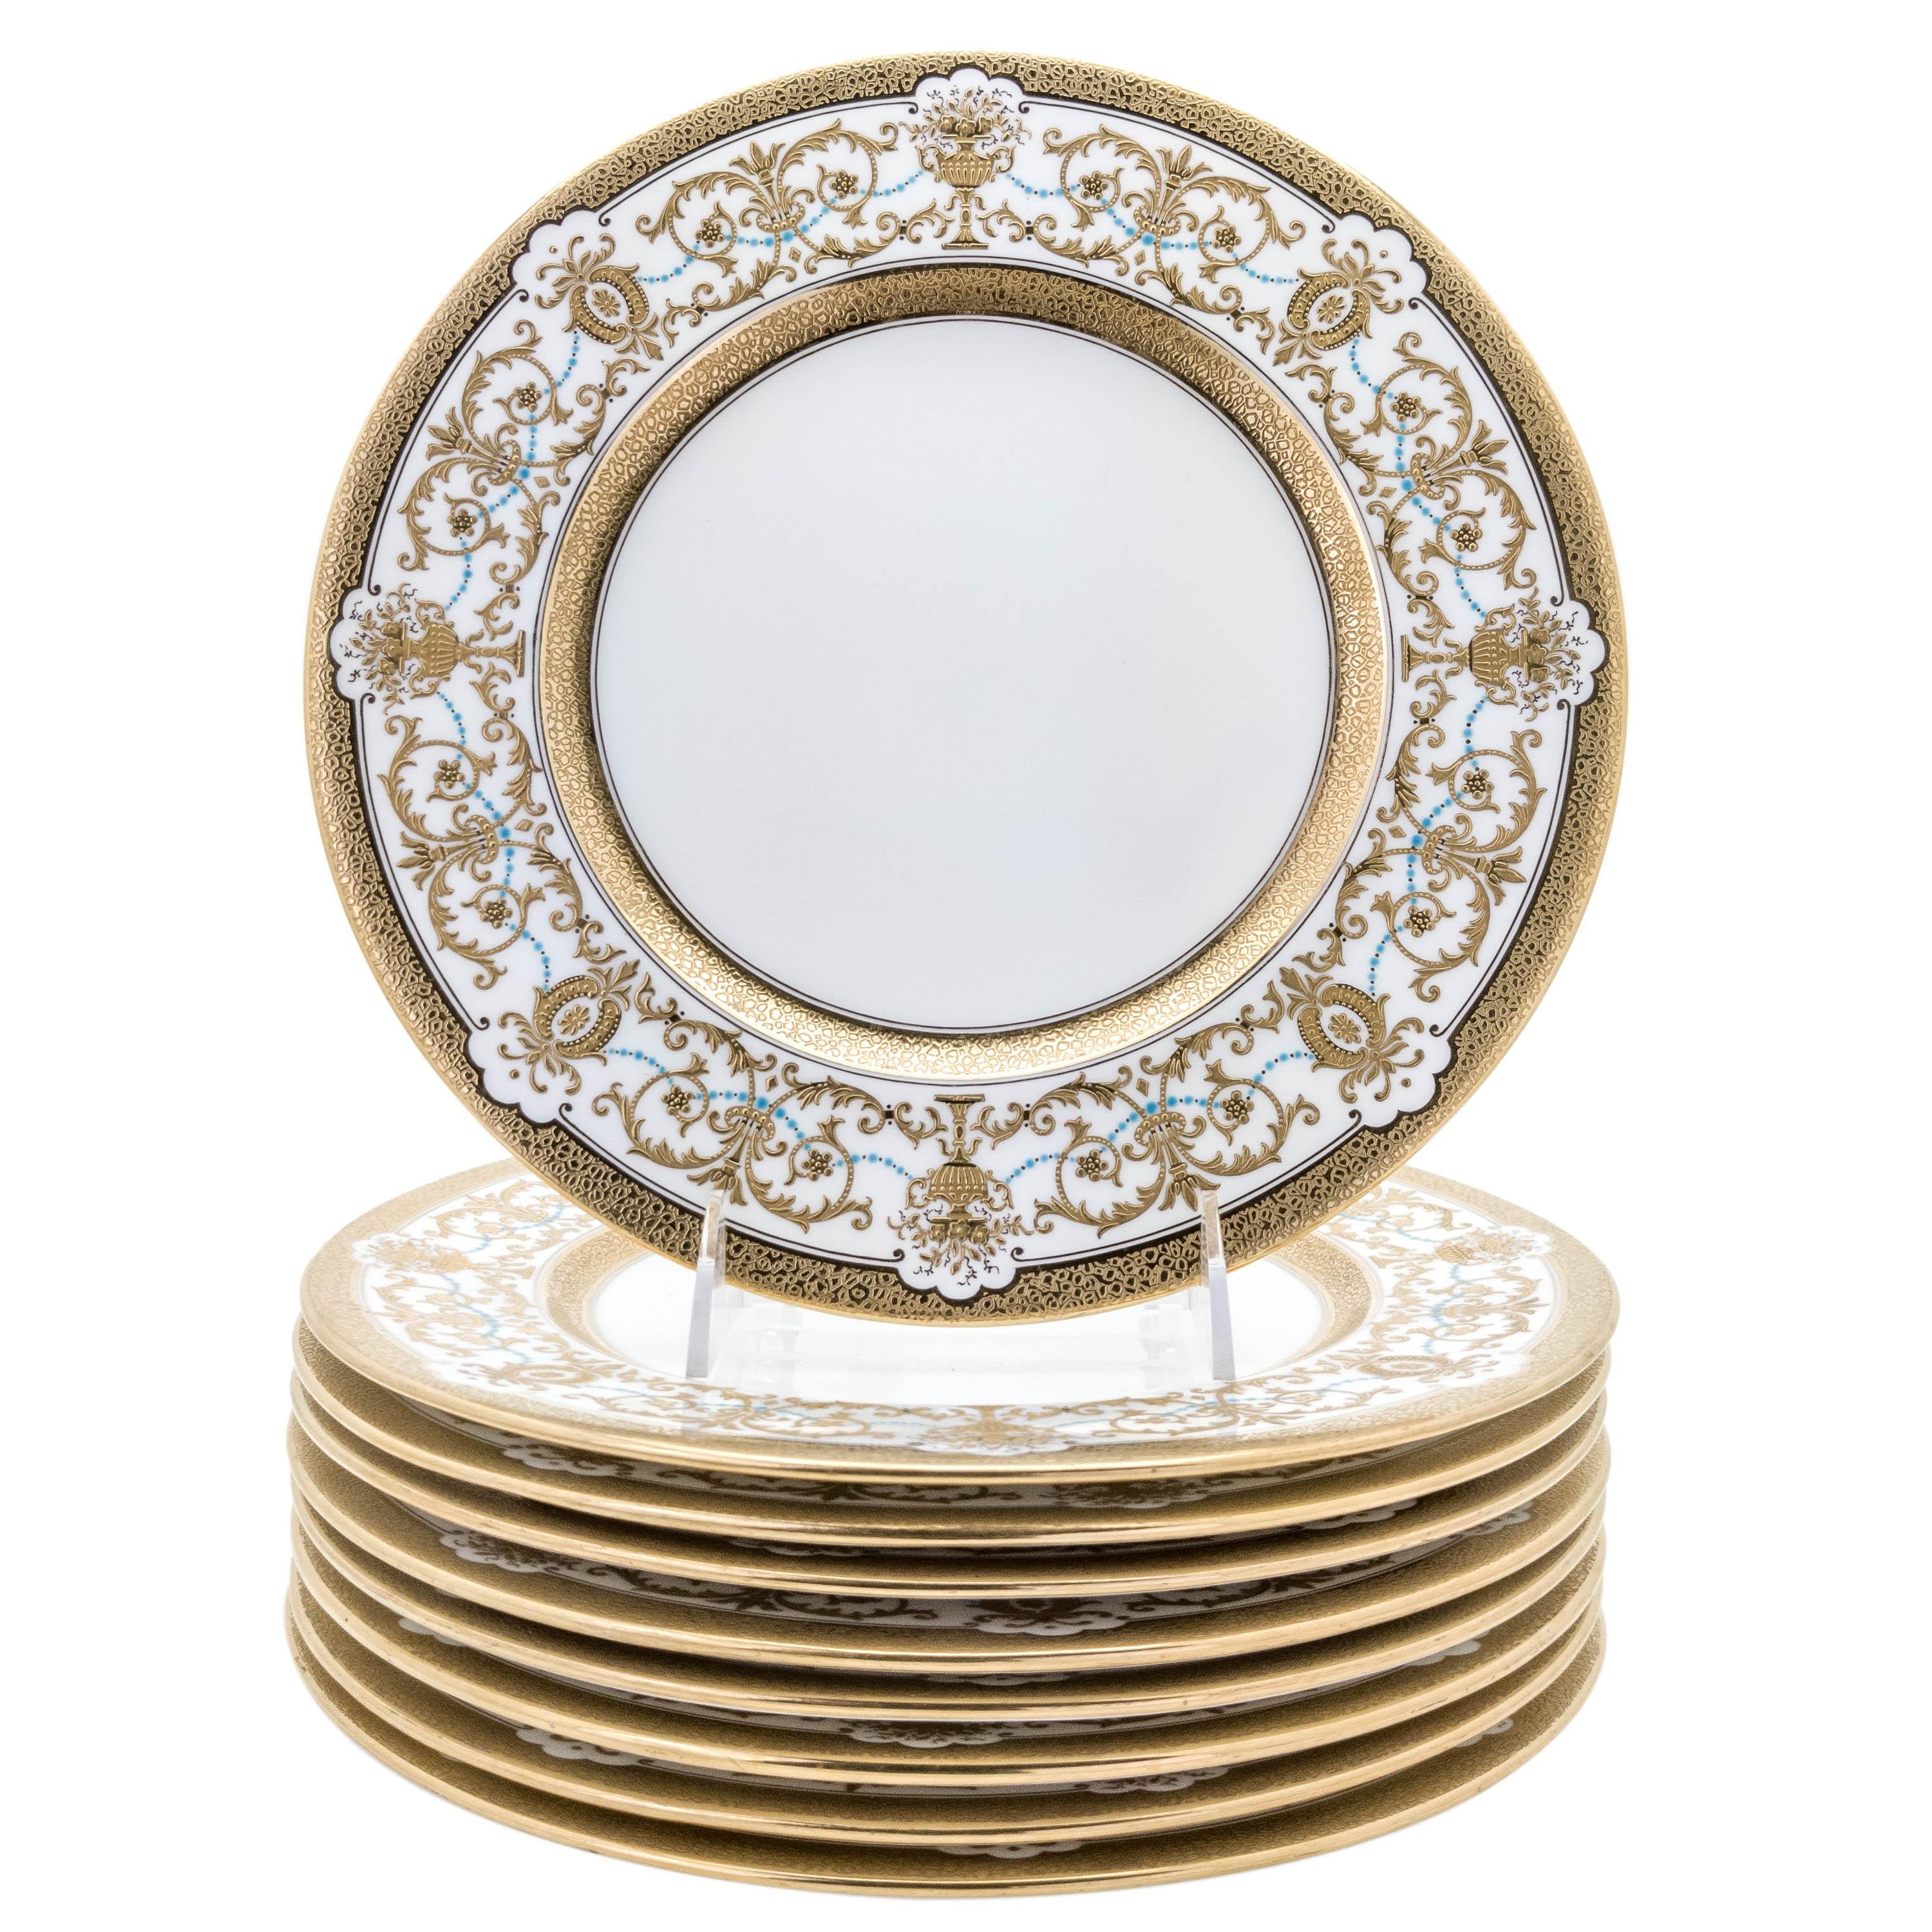 Hand-Crafted 10 Gilt Encrusted and Turquoise Jewel Custom Dinner Plates, Antique English